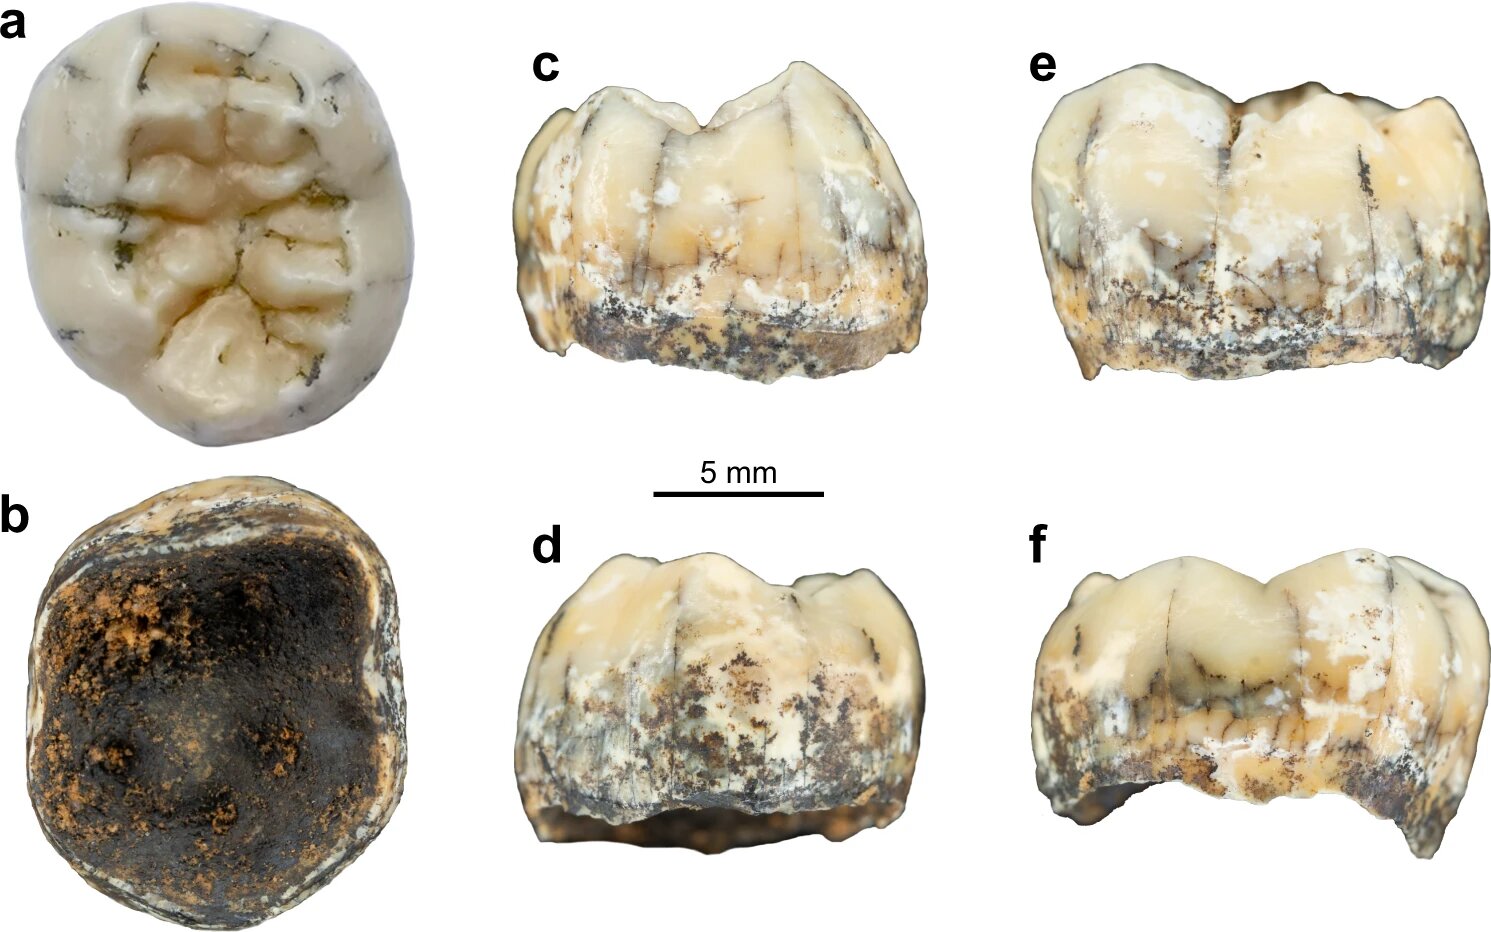 TNH2-1 hominin tooth found in Laos believed to be of a representatitve of the Denisovan spesies. Credit: Fabrice Demeter et al. / Nature Communications, 2022